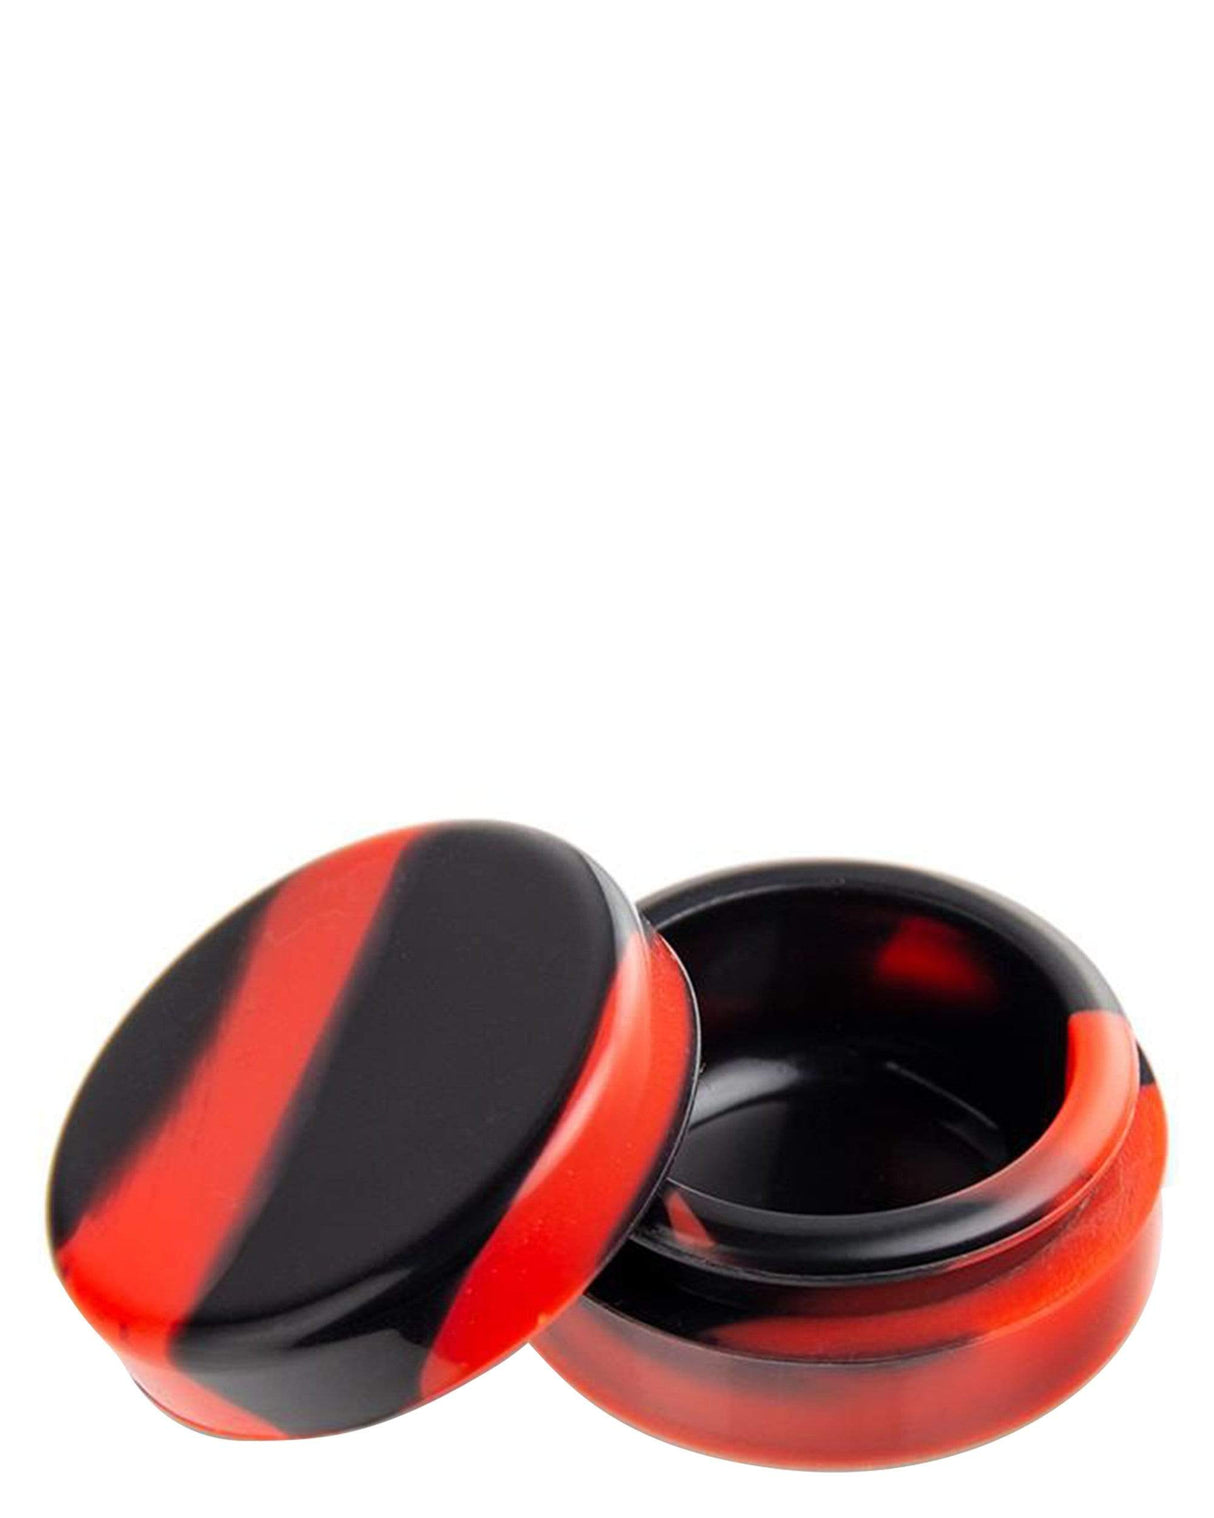 Ooze Echo Red and Black Silicone Stash Jar, Open View, Compact and Travel-Friendly